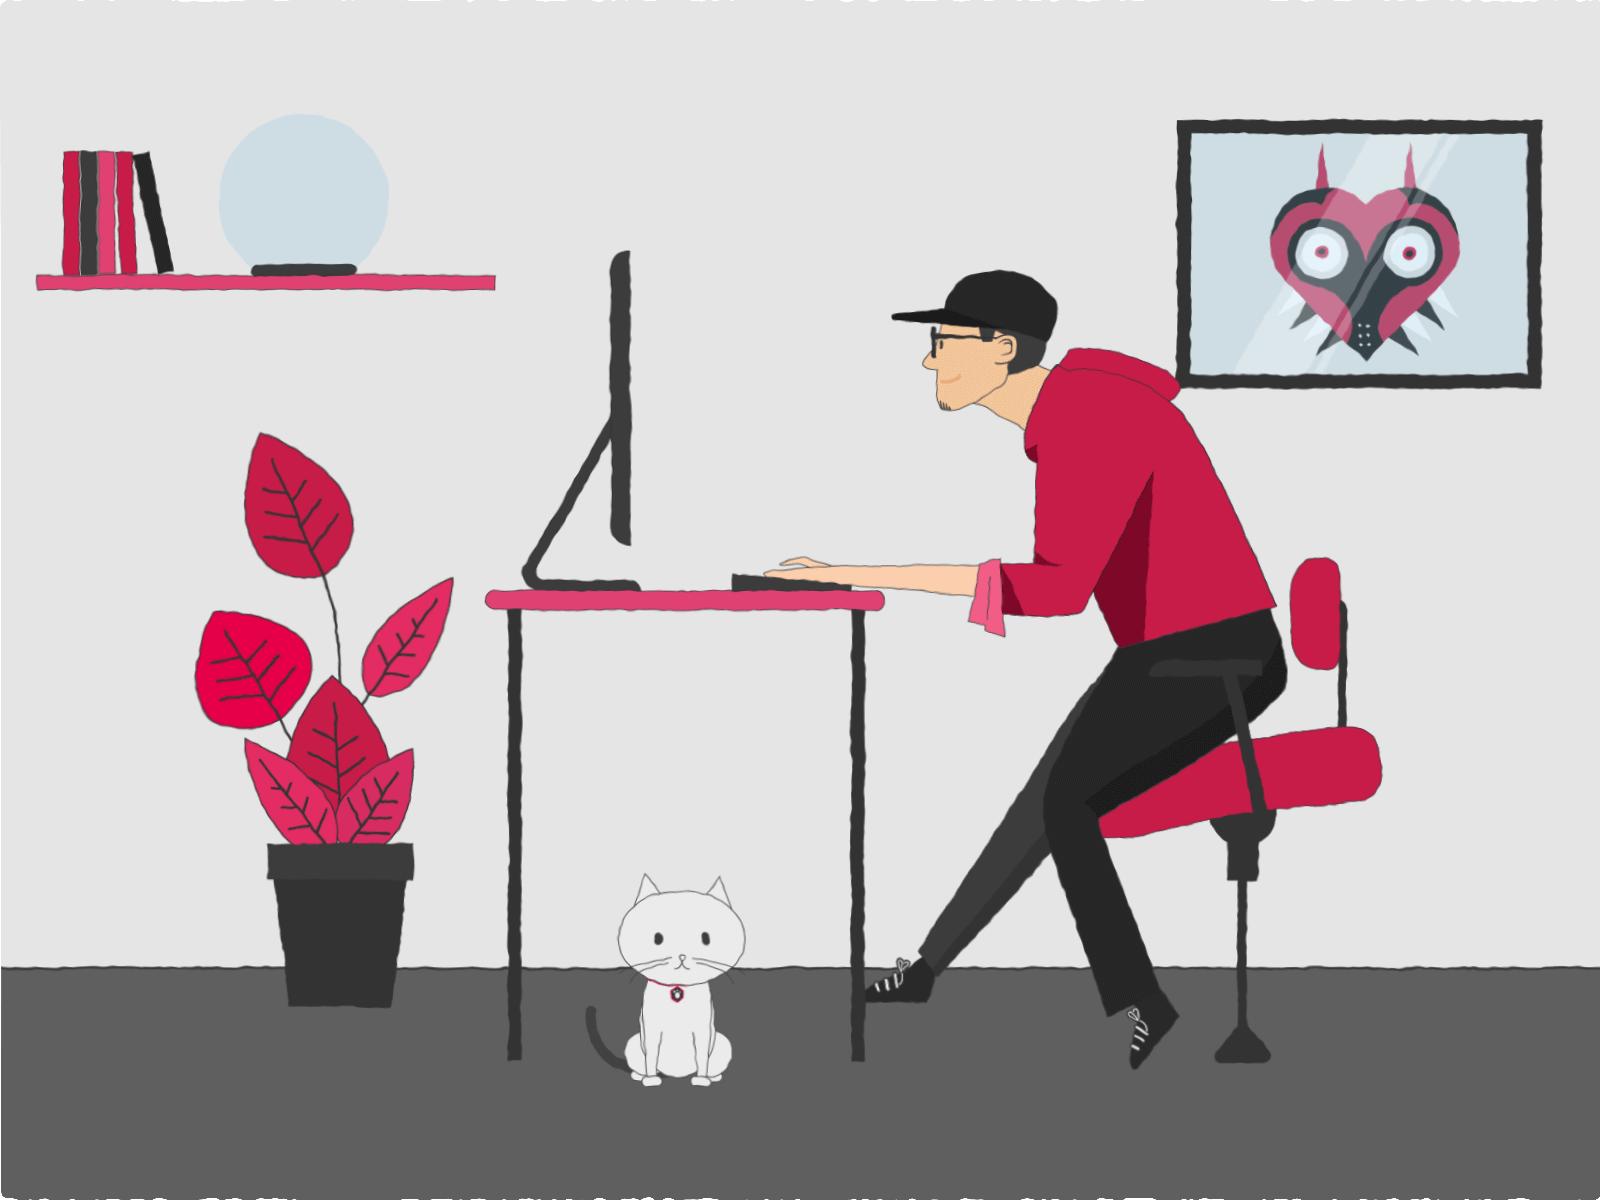 Fessuoy and his kitty adobe after effects aftereffects animal animation animation 2d art cat design dribbble dribbble invite flat art illustration illustrator logo motion design motion graphic motion graphics motiondesign vector